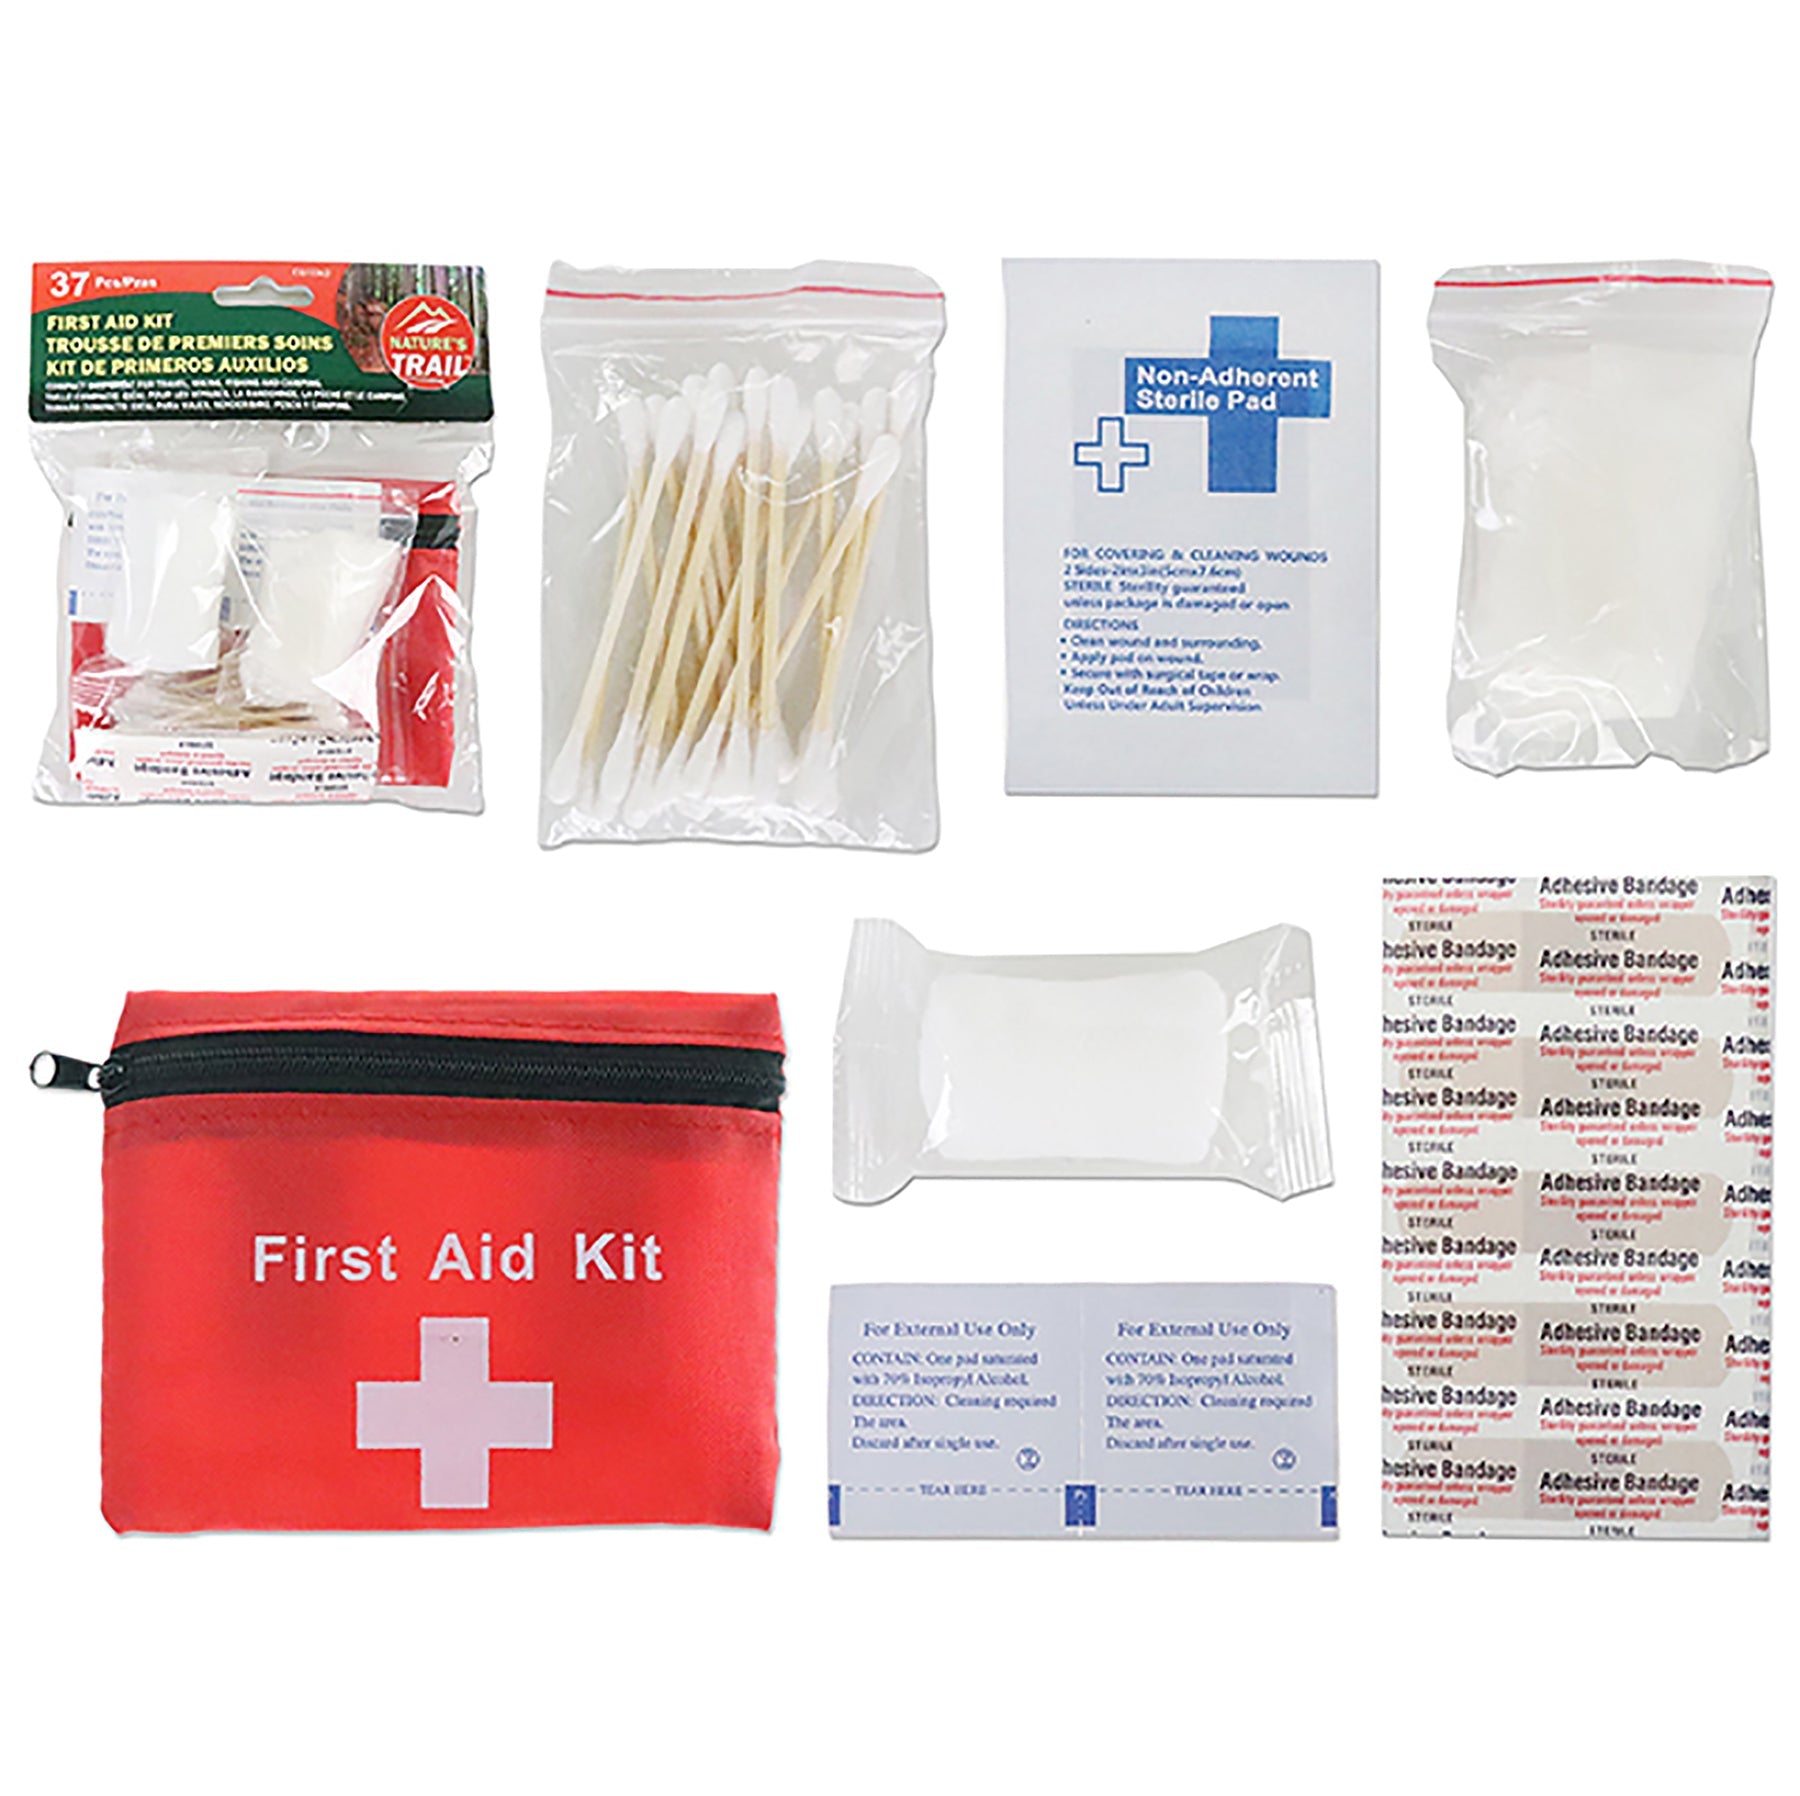 Nature's Trail First Aid Travel Kit Pouch 37pcs